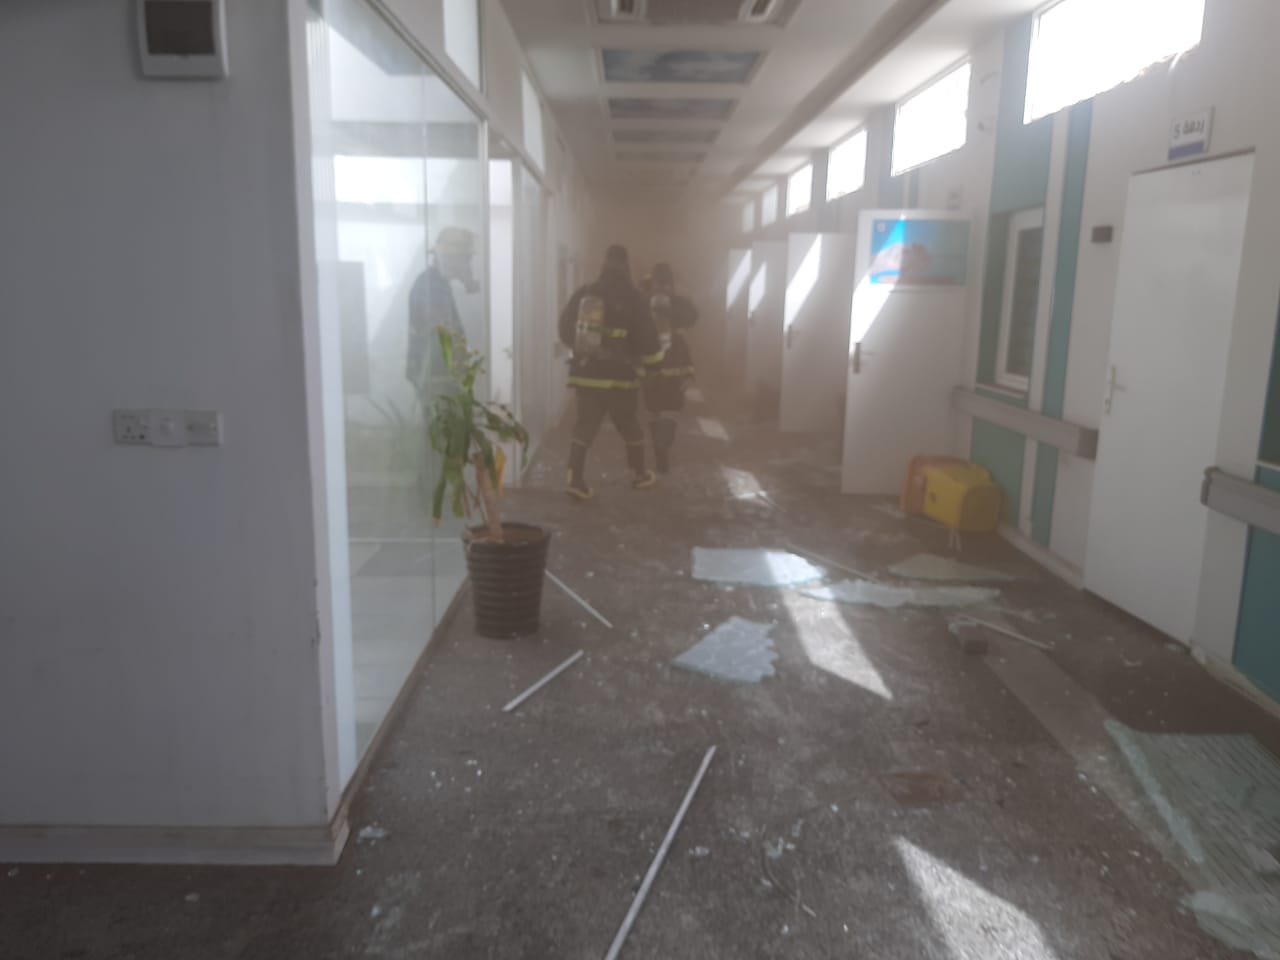 Civil Defense teams extinguish a fire that broke out in a hospital in Najaf 